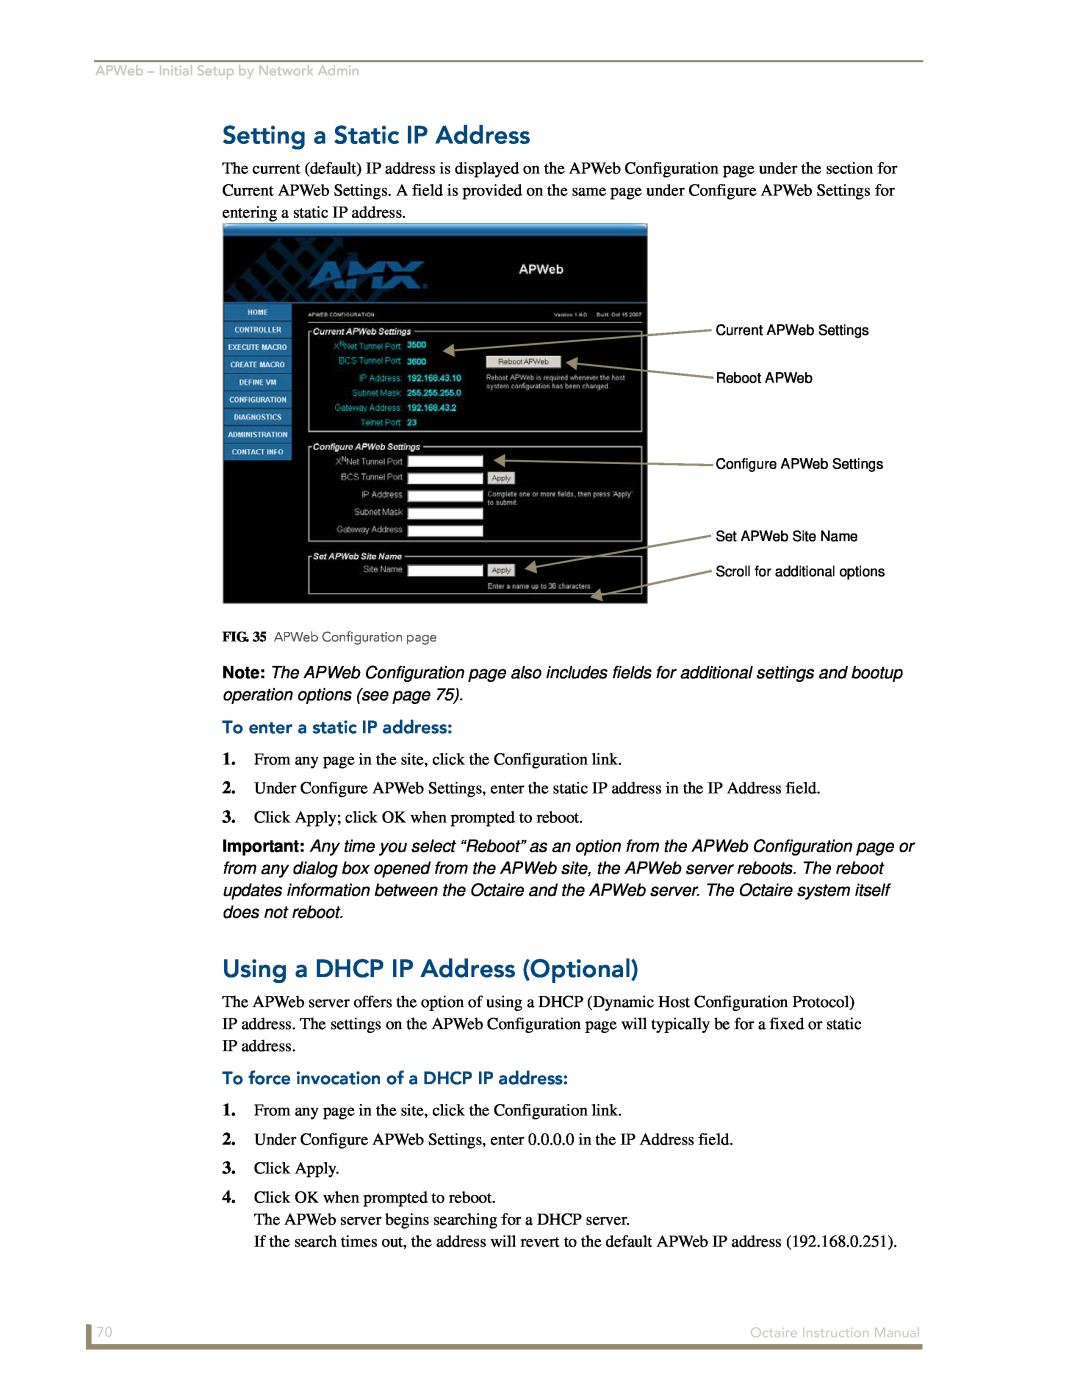 AMX Octaire instruction manual Setting a Static IP Address, Using a DHCP IP Address Optional, To enter a static IP address 